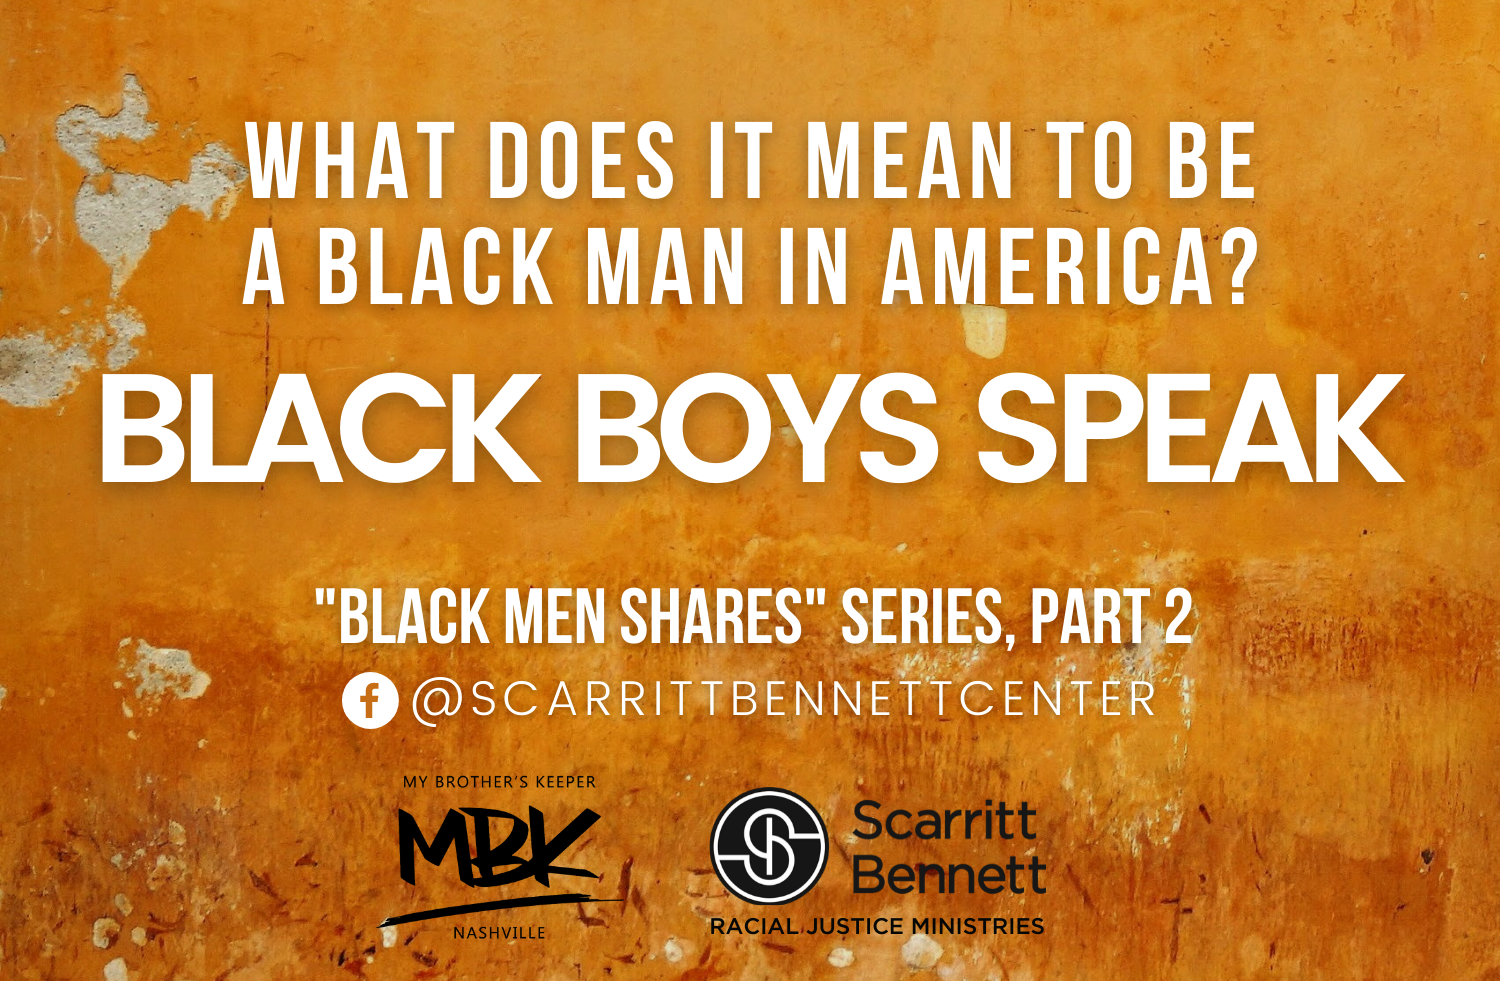 Black Boys Speak: What Does it Mean to be a Black Man in America?